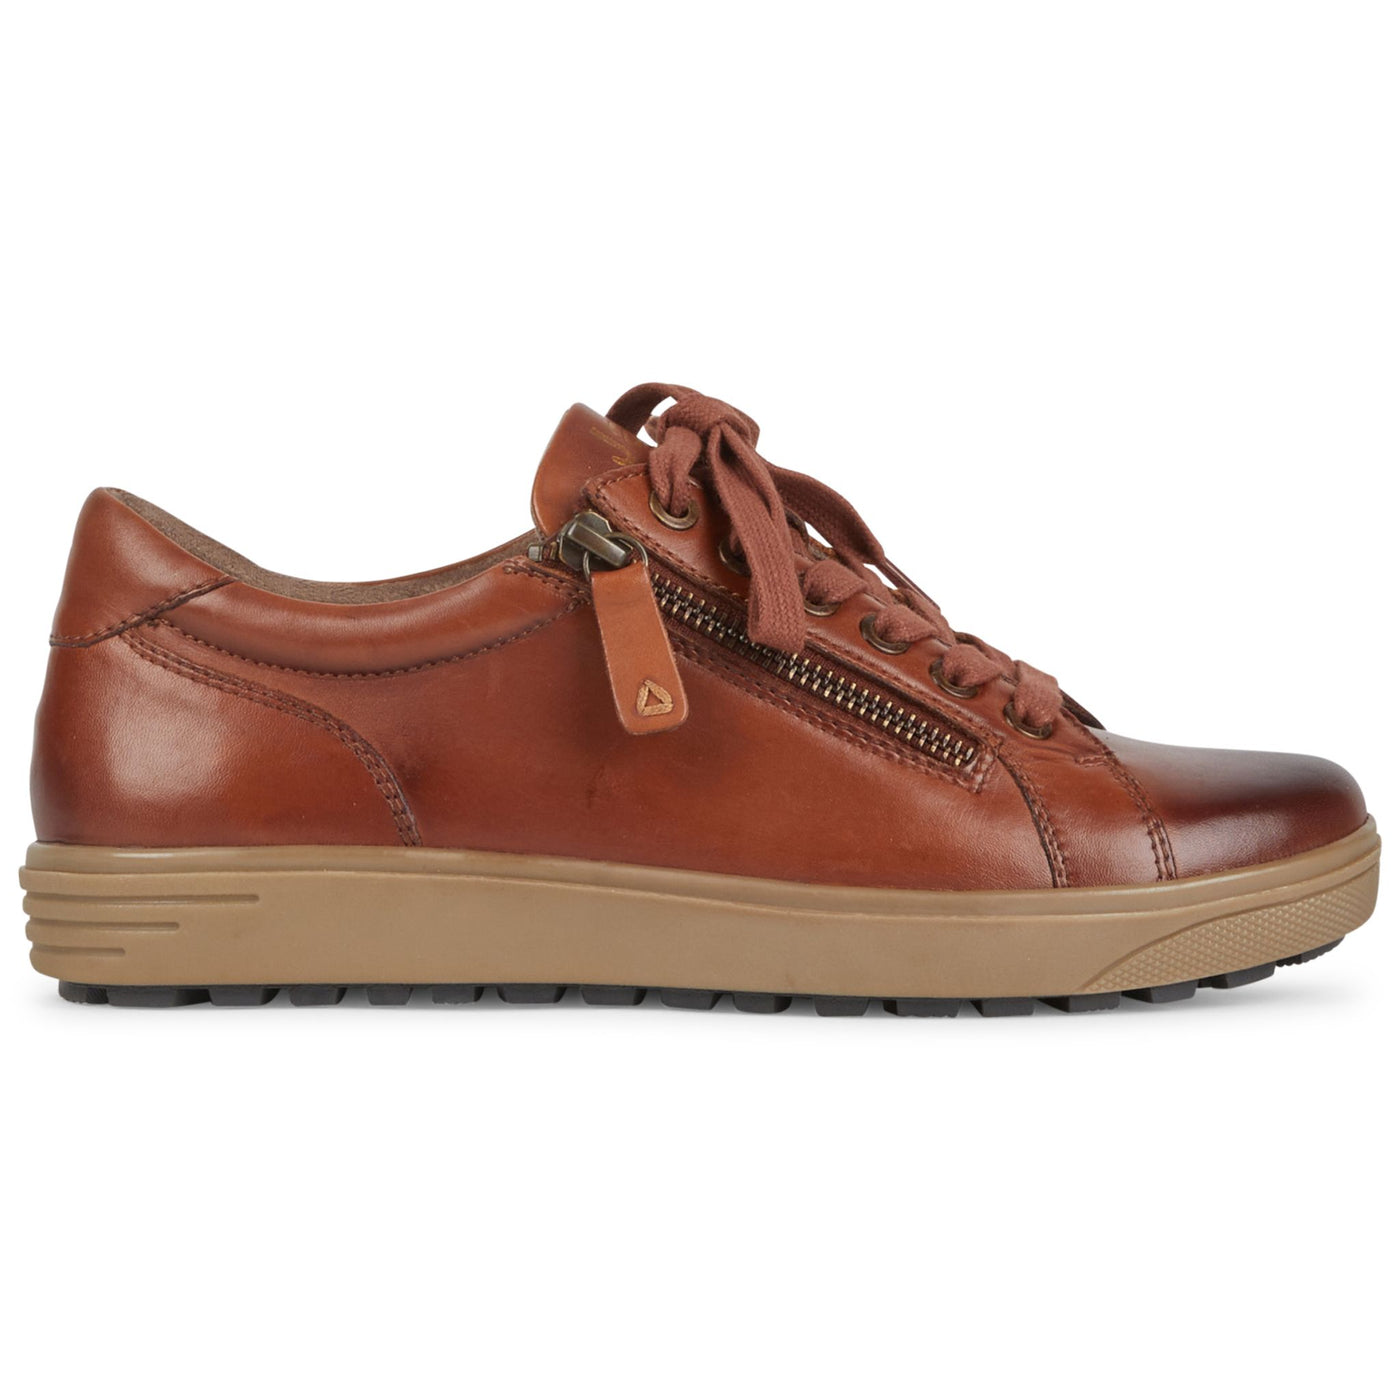 Buy quality Kayce - COGNAC Laces from Planet shoes